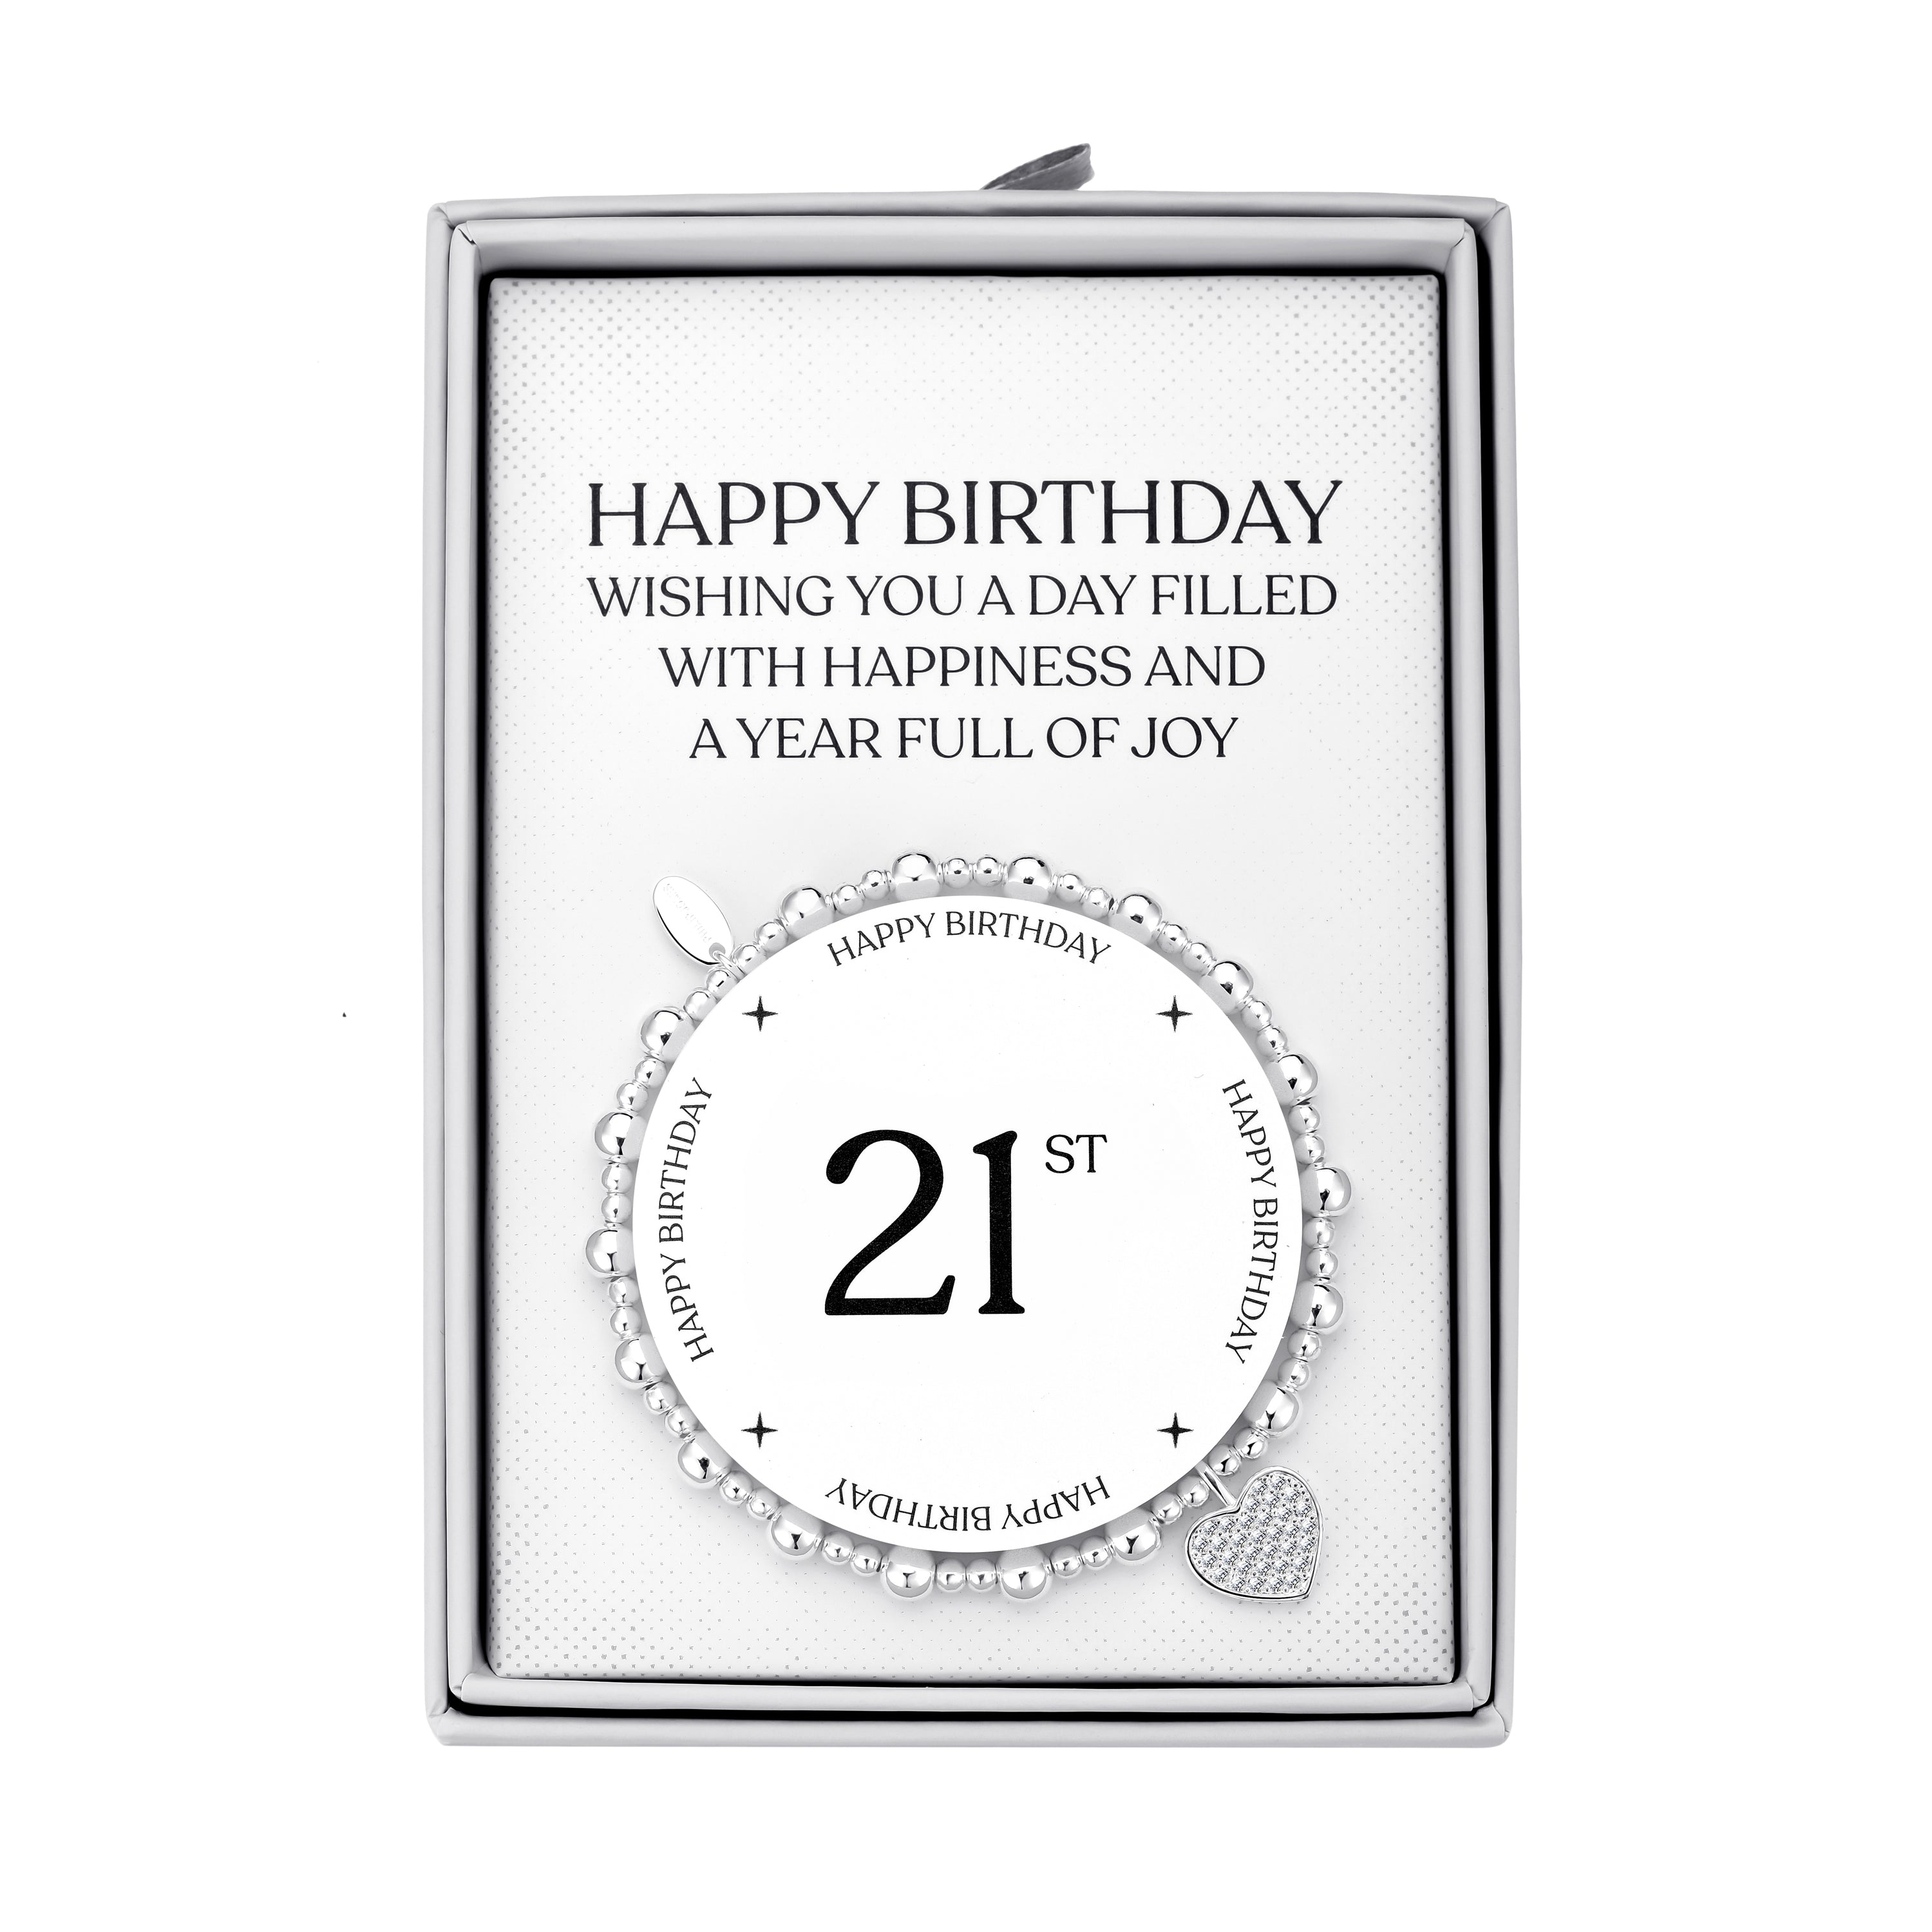 21st Birthday Heart Charm Stretch Bracelet with Quote Gift Box by Philip Jones Jewellery